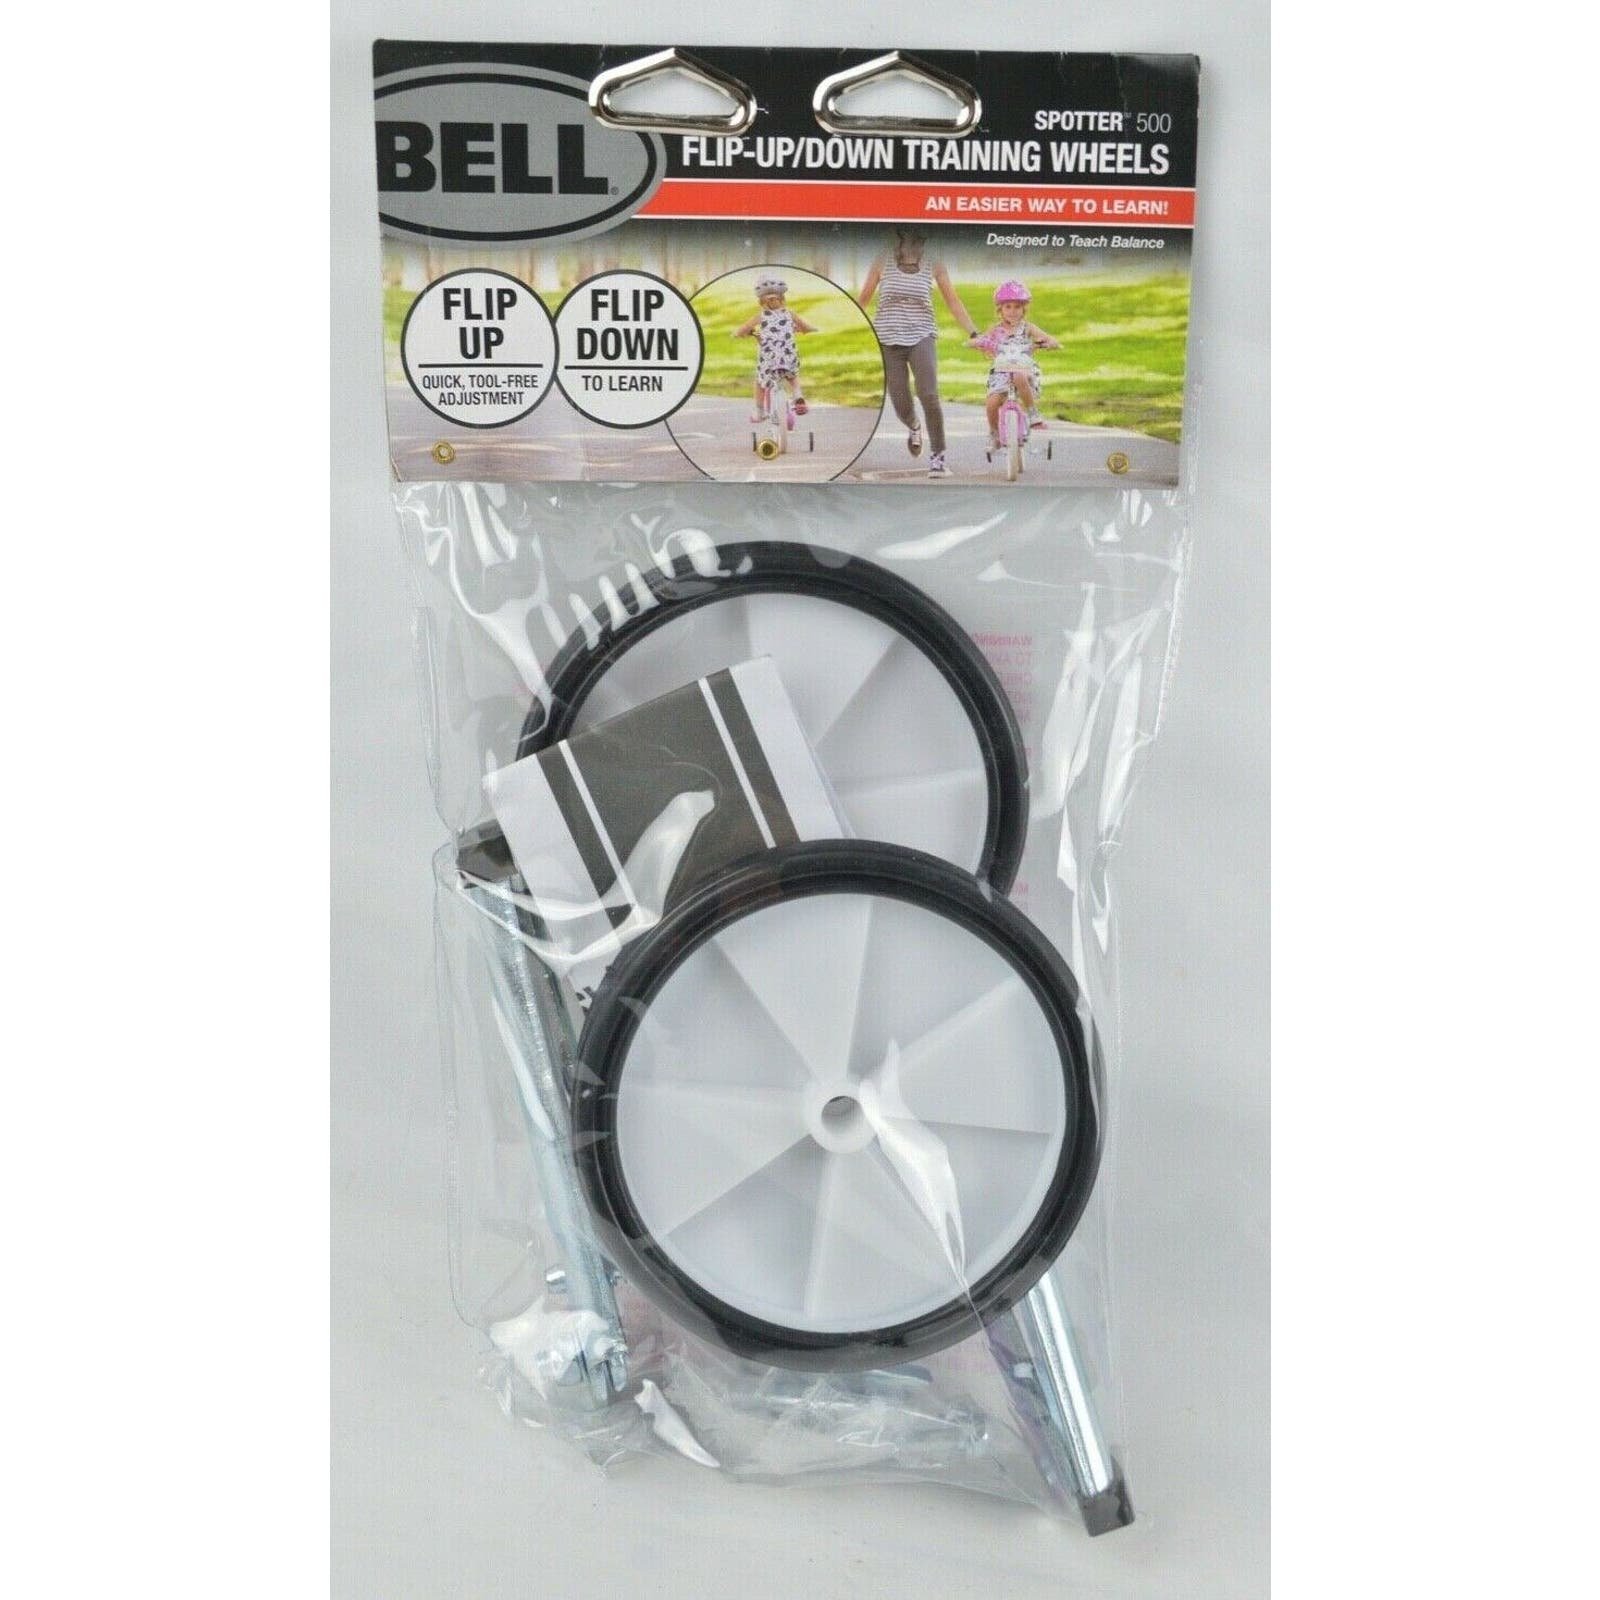 Bell Bicycle Bike Spotter Trainer Balance Support Stabilize Adjustable Wheels aAAOQ0X5M